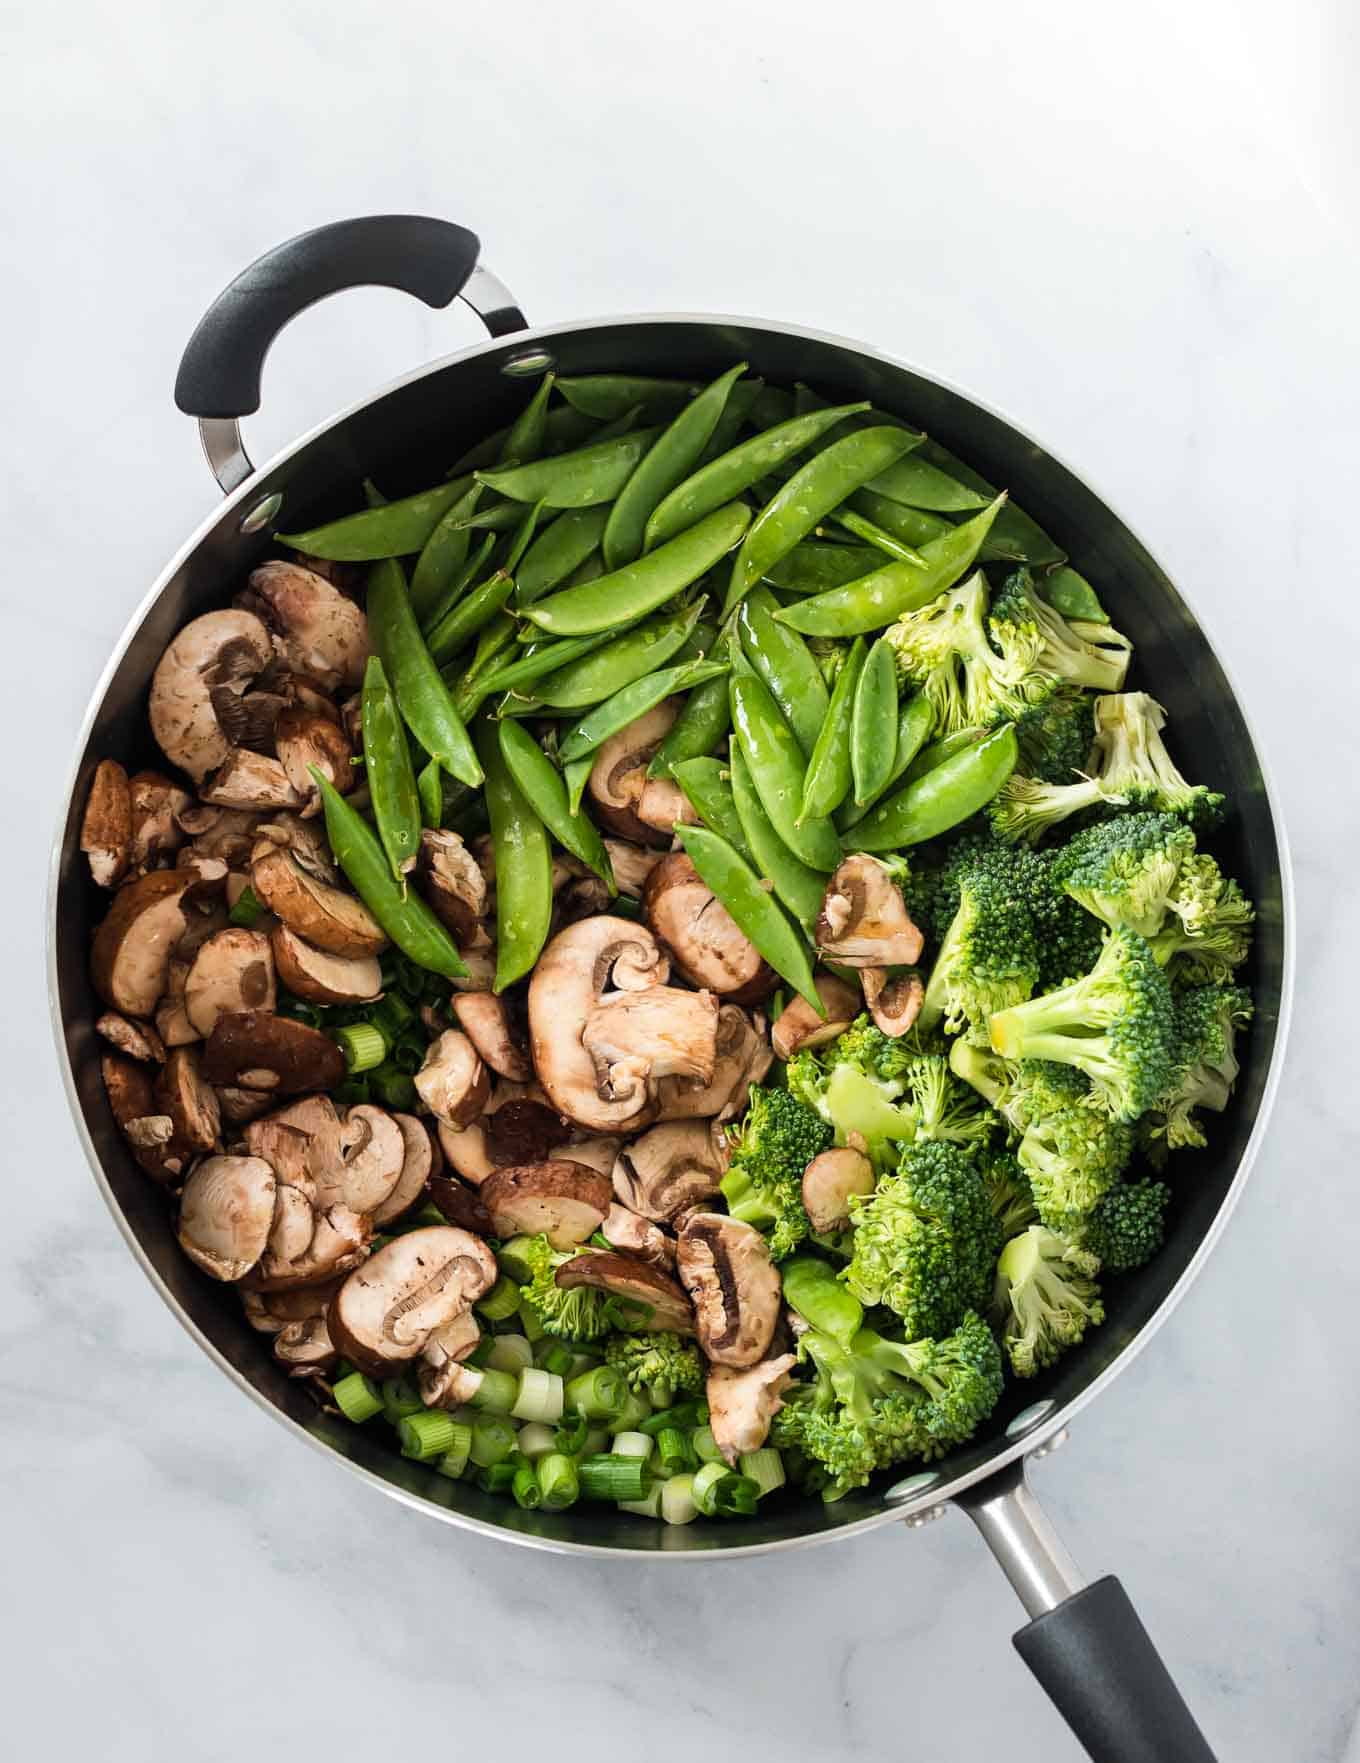 mushrooms, sugar snap peas, broccoli, and green onions in a large skillet